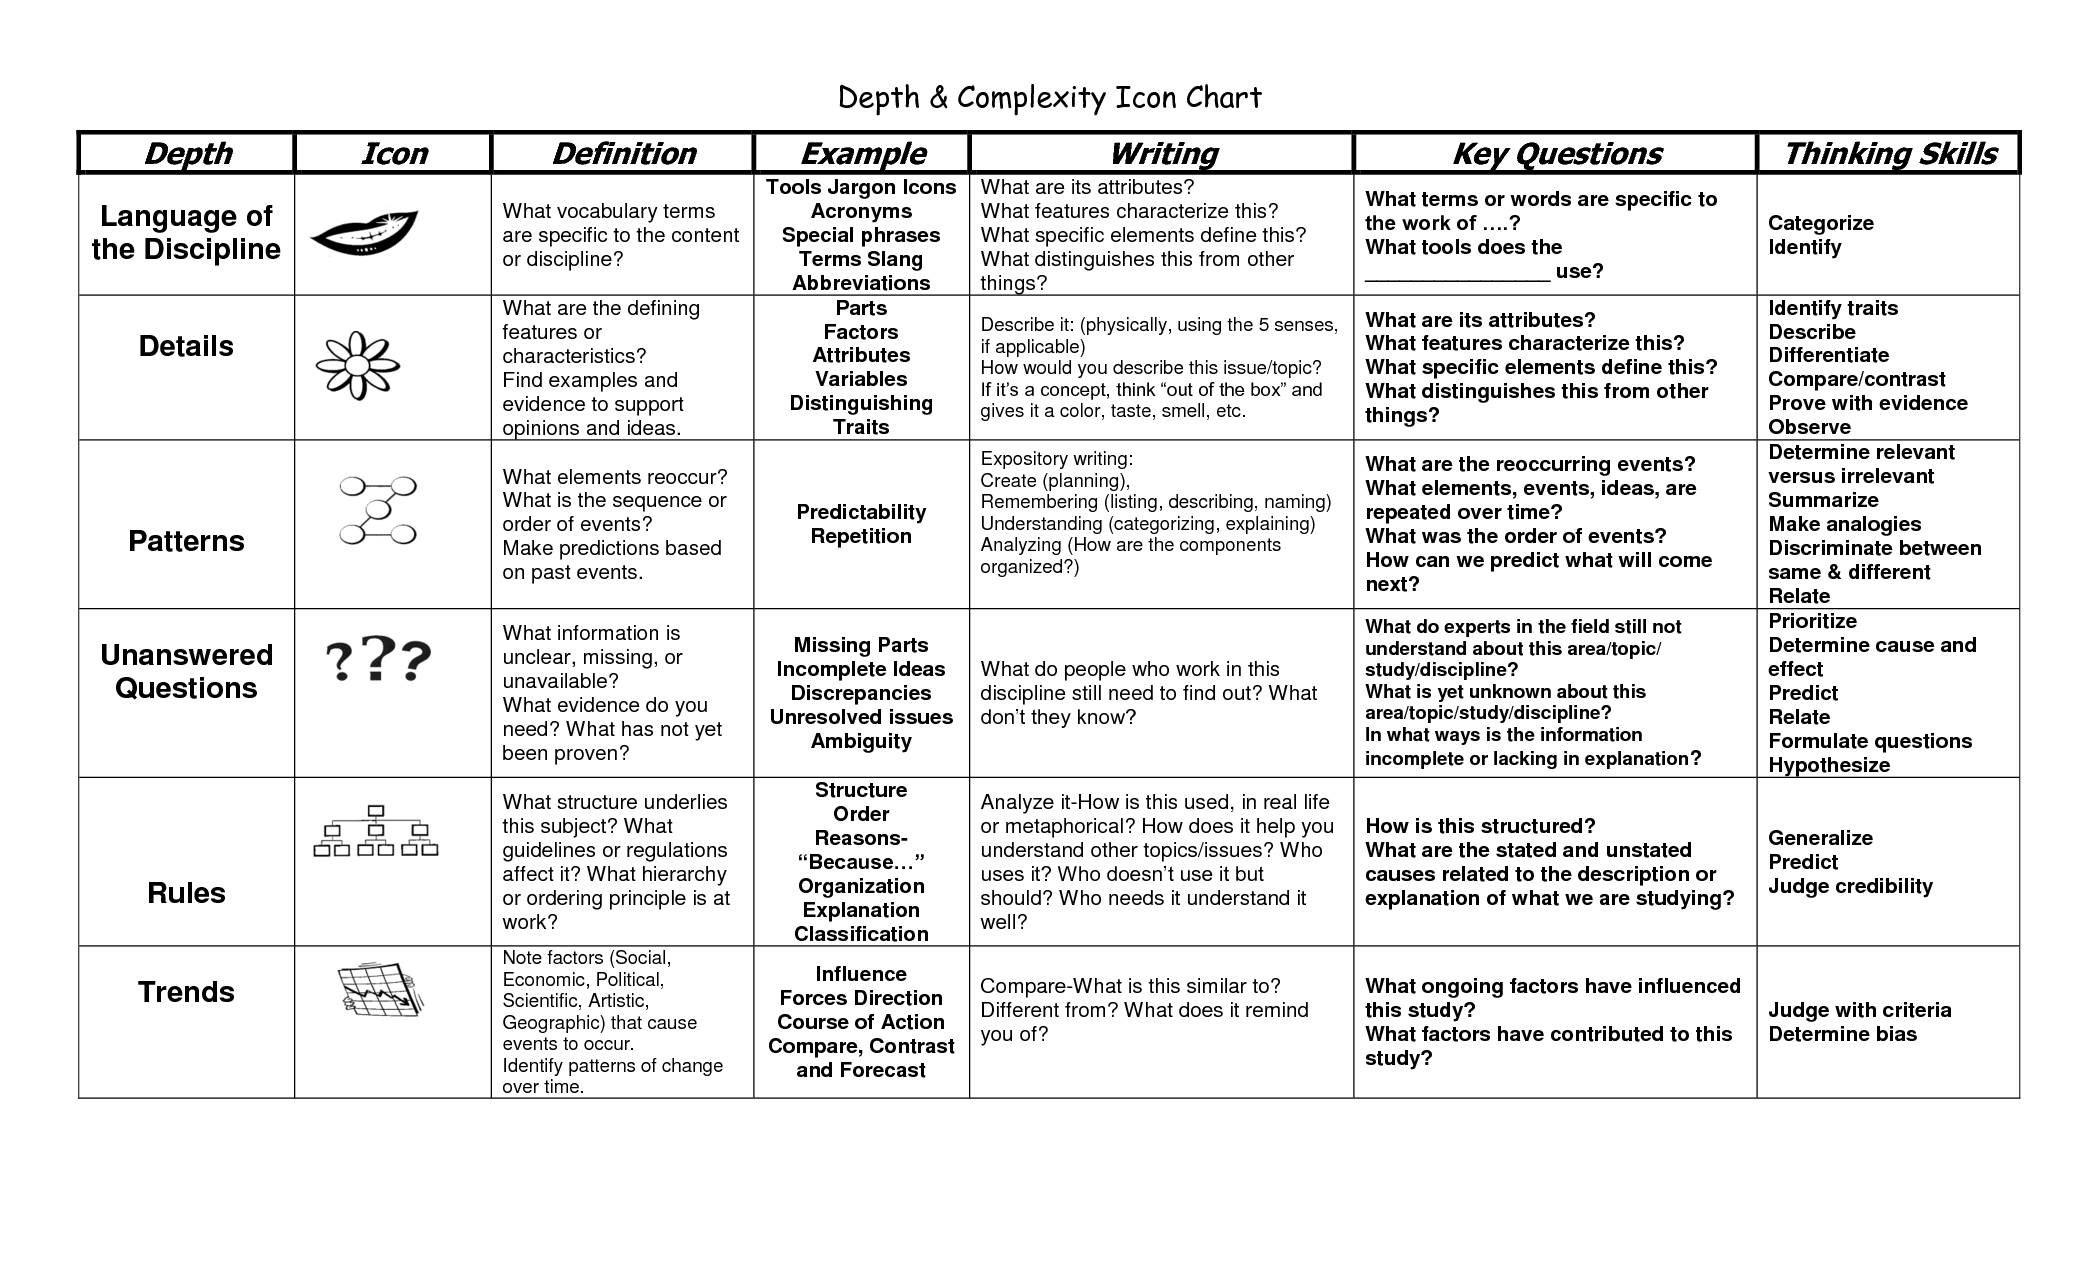 Depth and Complexity Icon Chart